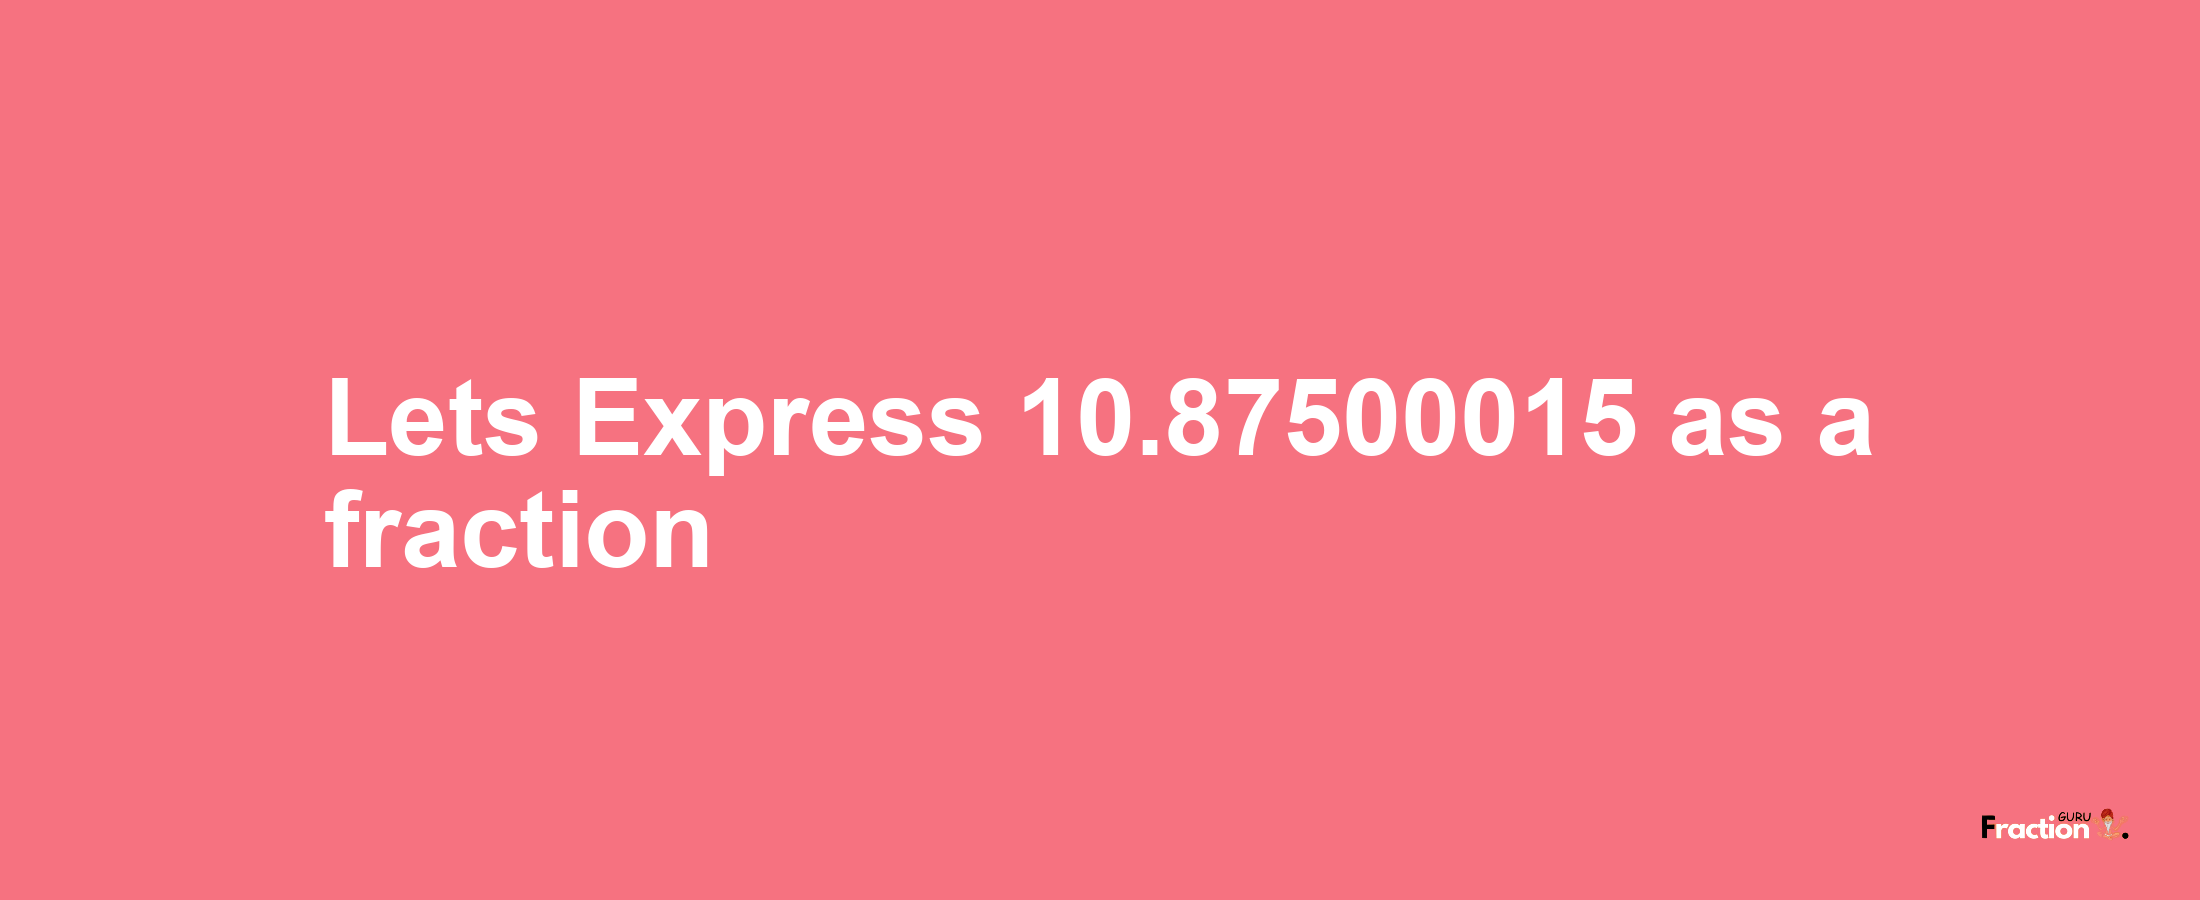 Lets Express 10.87500015 as afraction